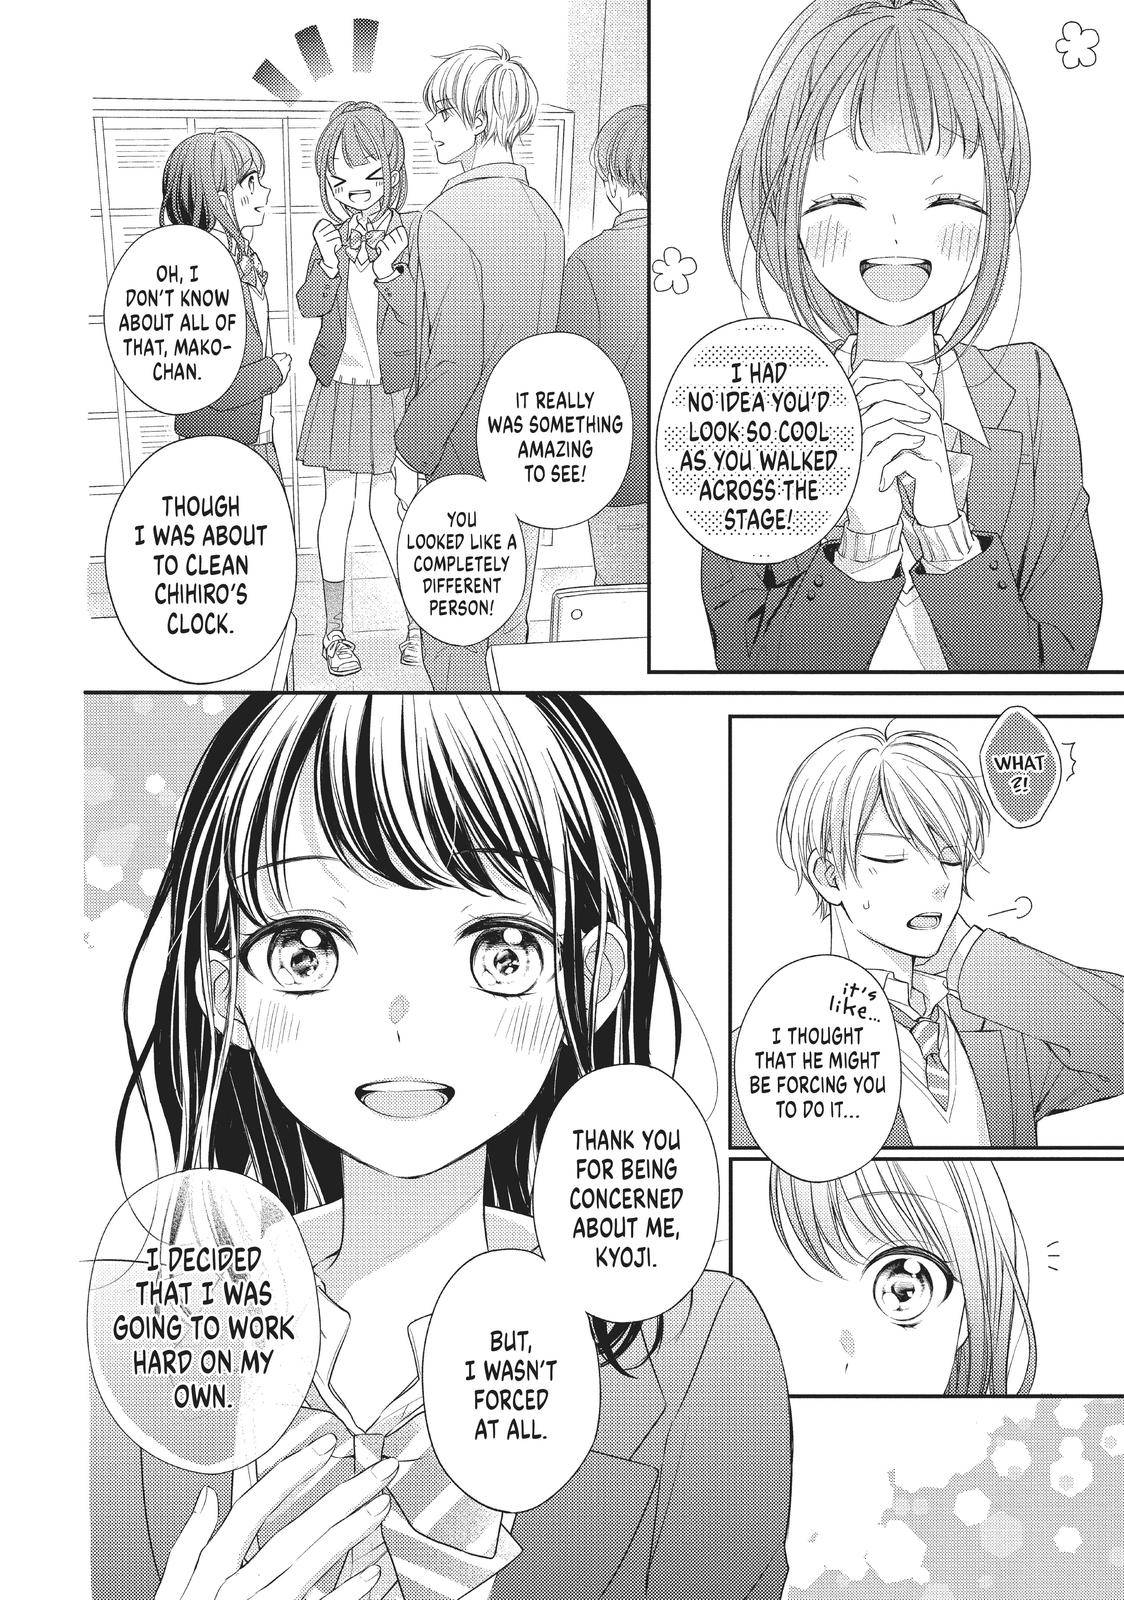 Chihiro-kun Only Has Eyes for Me - chapter 4 - #6